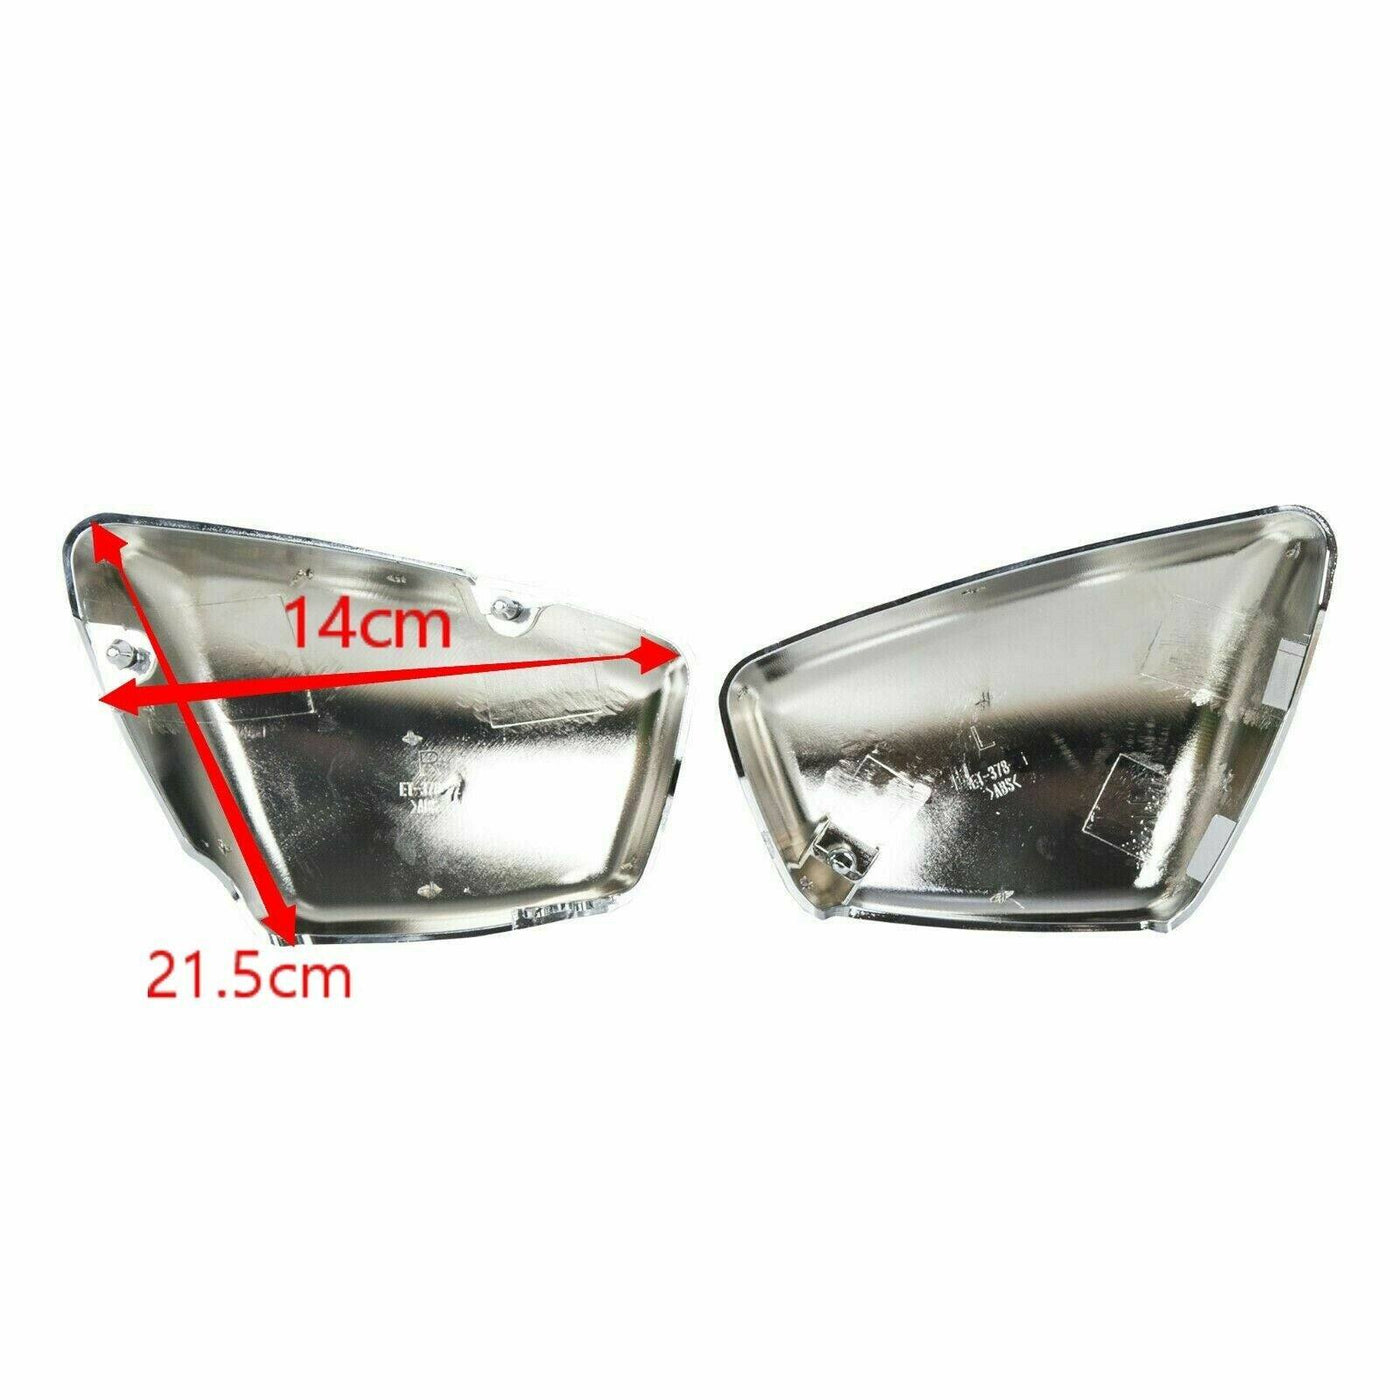 For 84-UP Yamaha XV 700 750 1000 1100 Virago Left Right Side Panel Cover Chrome - Moto Life Products